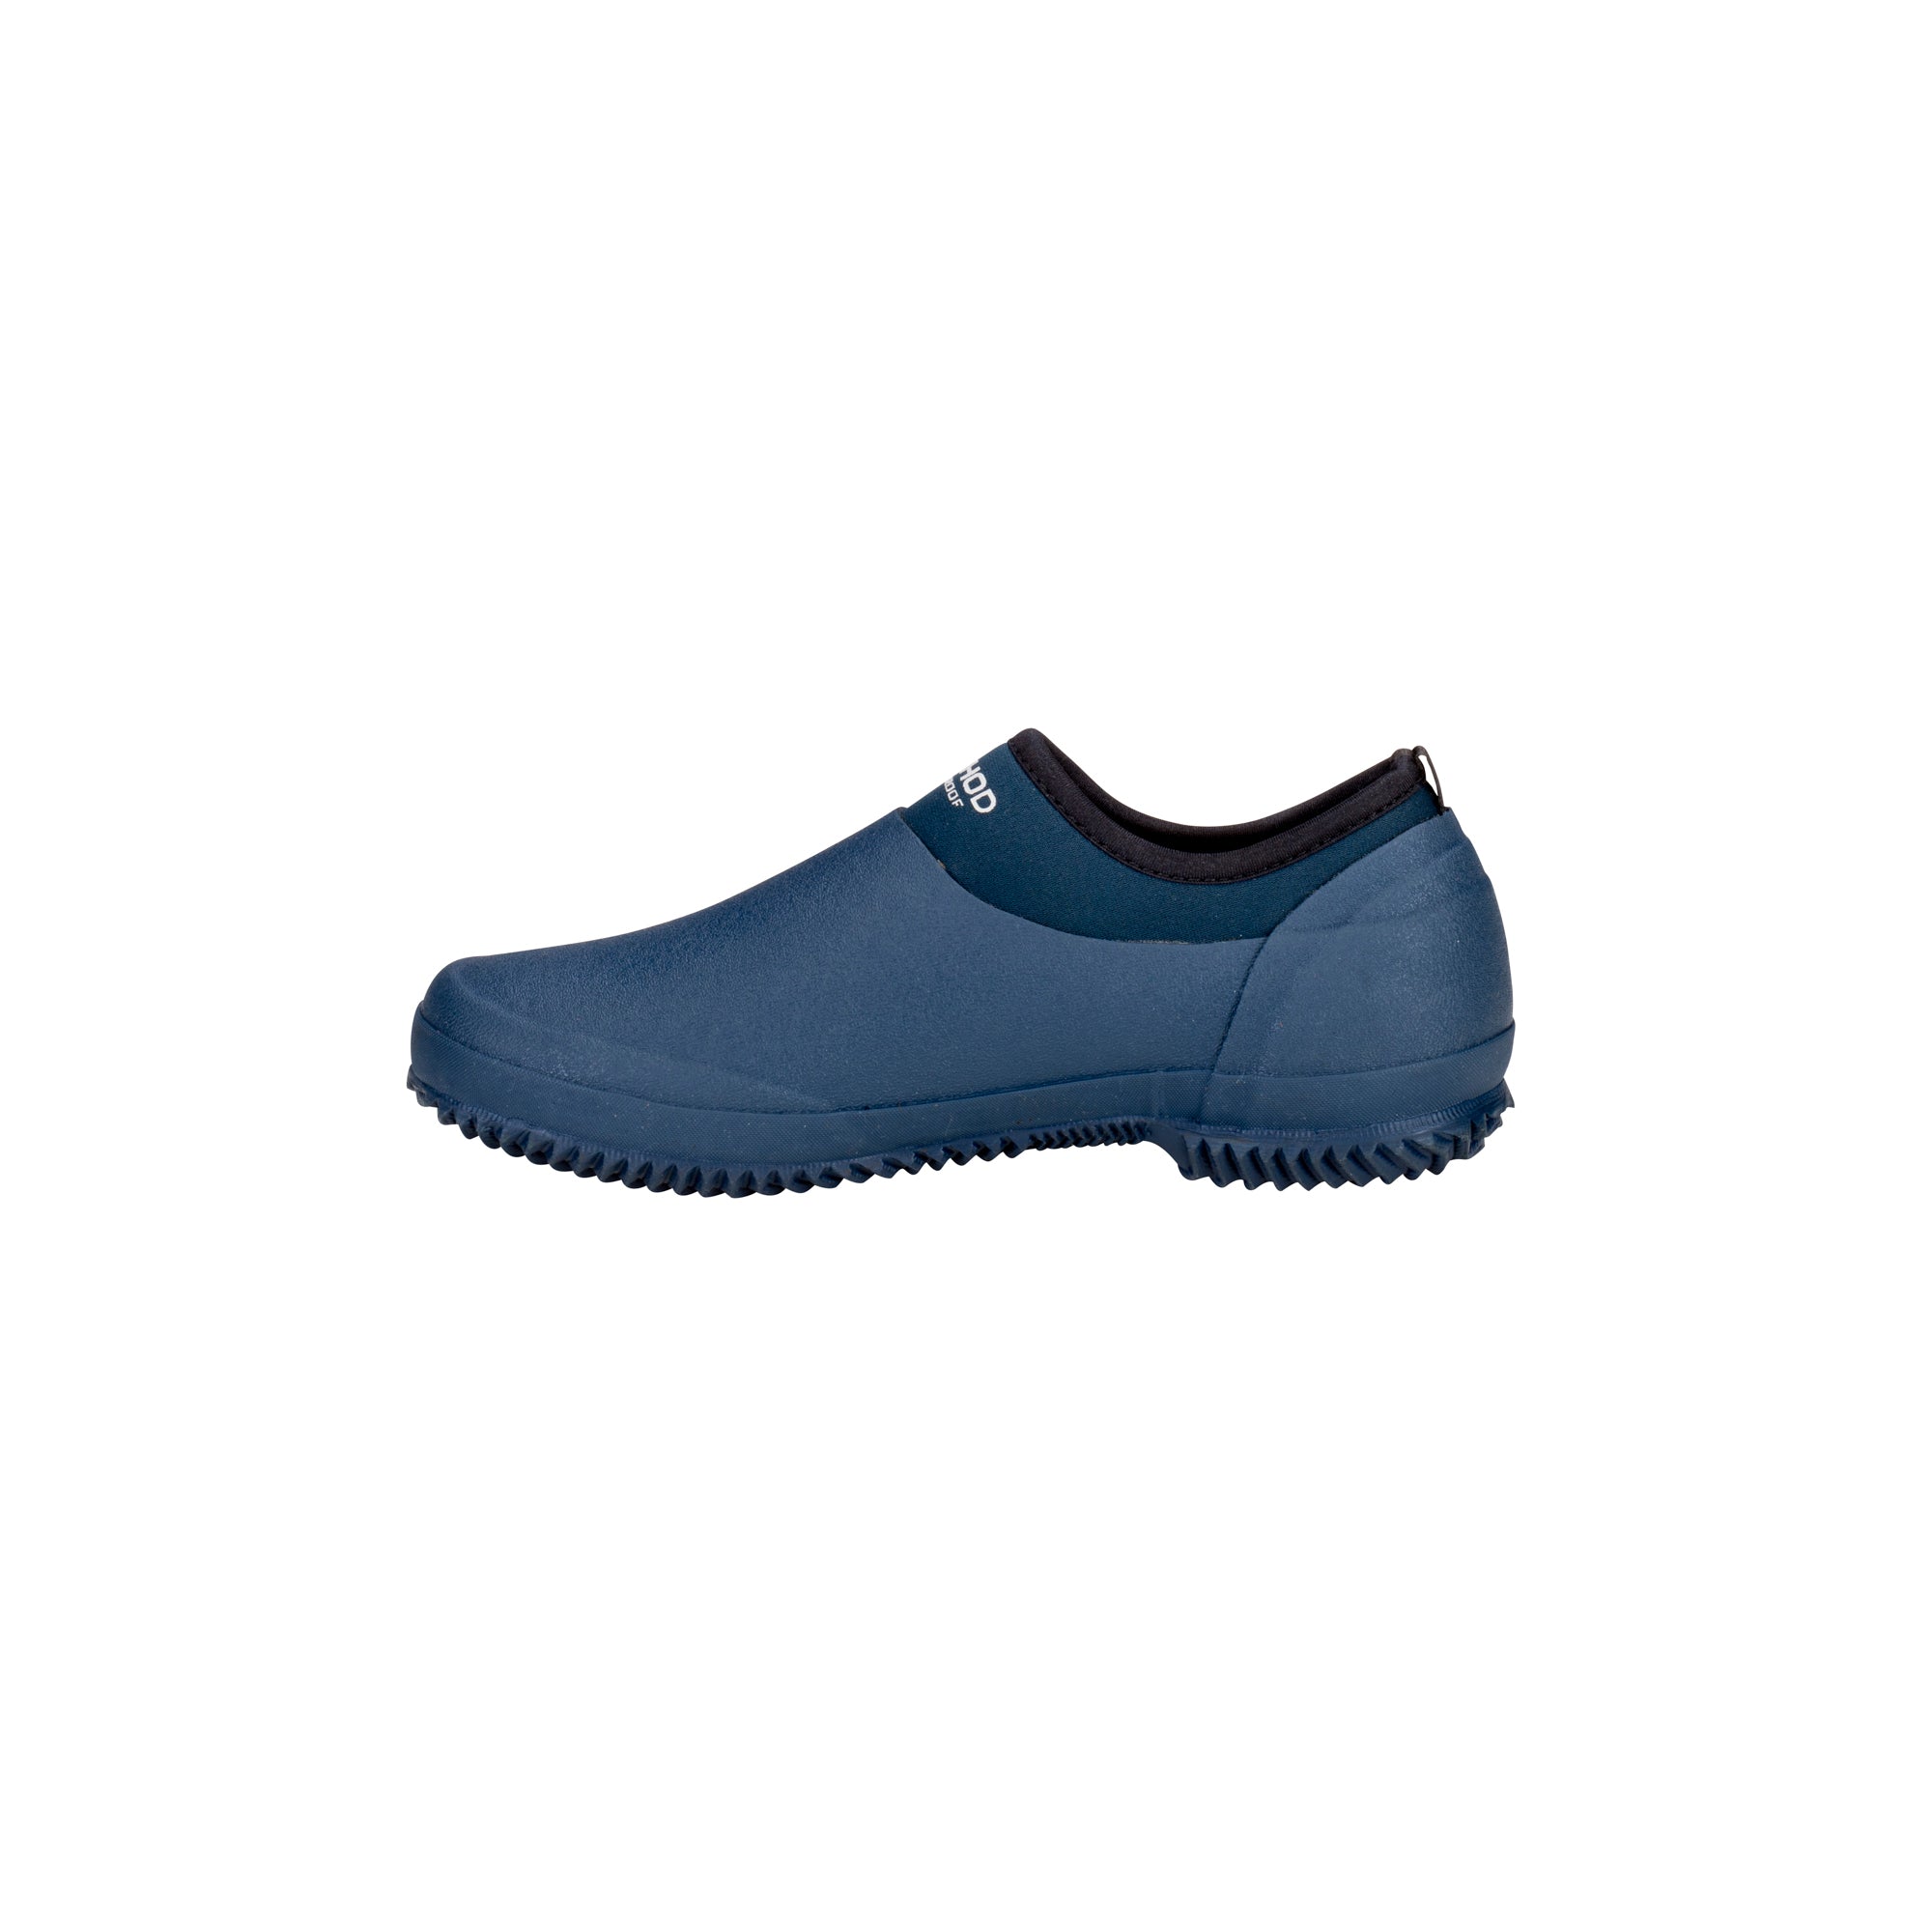 navy work shoes womens